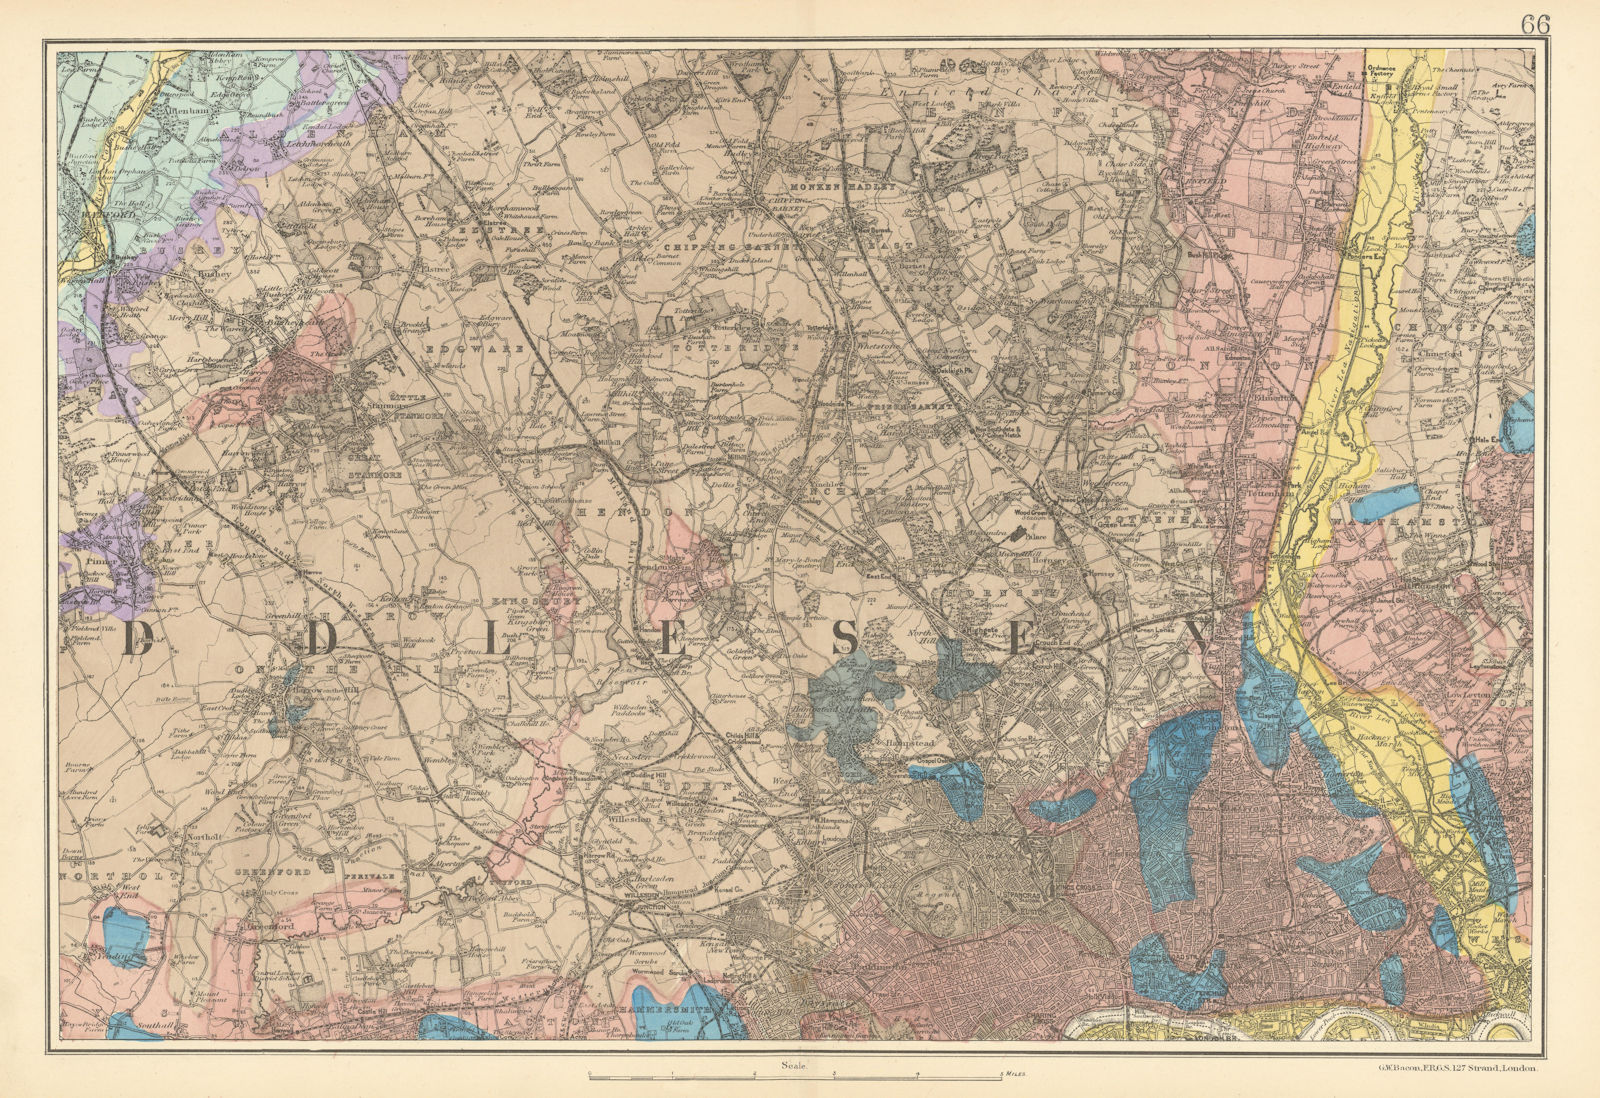 NW LONDON GEOLOGICAL Westminster Islington Brent Ealing Camden.BACON 1900 map